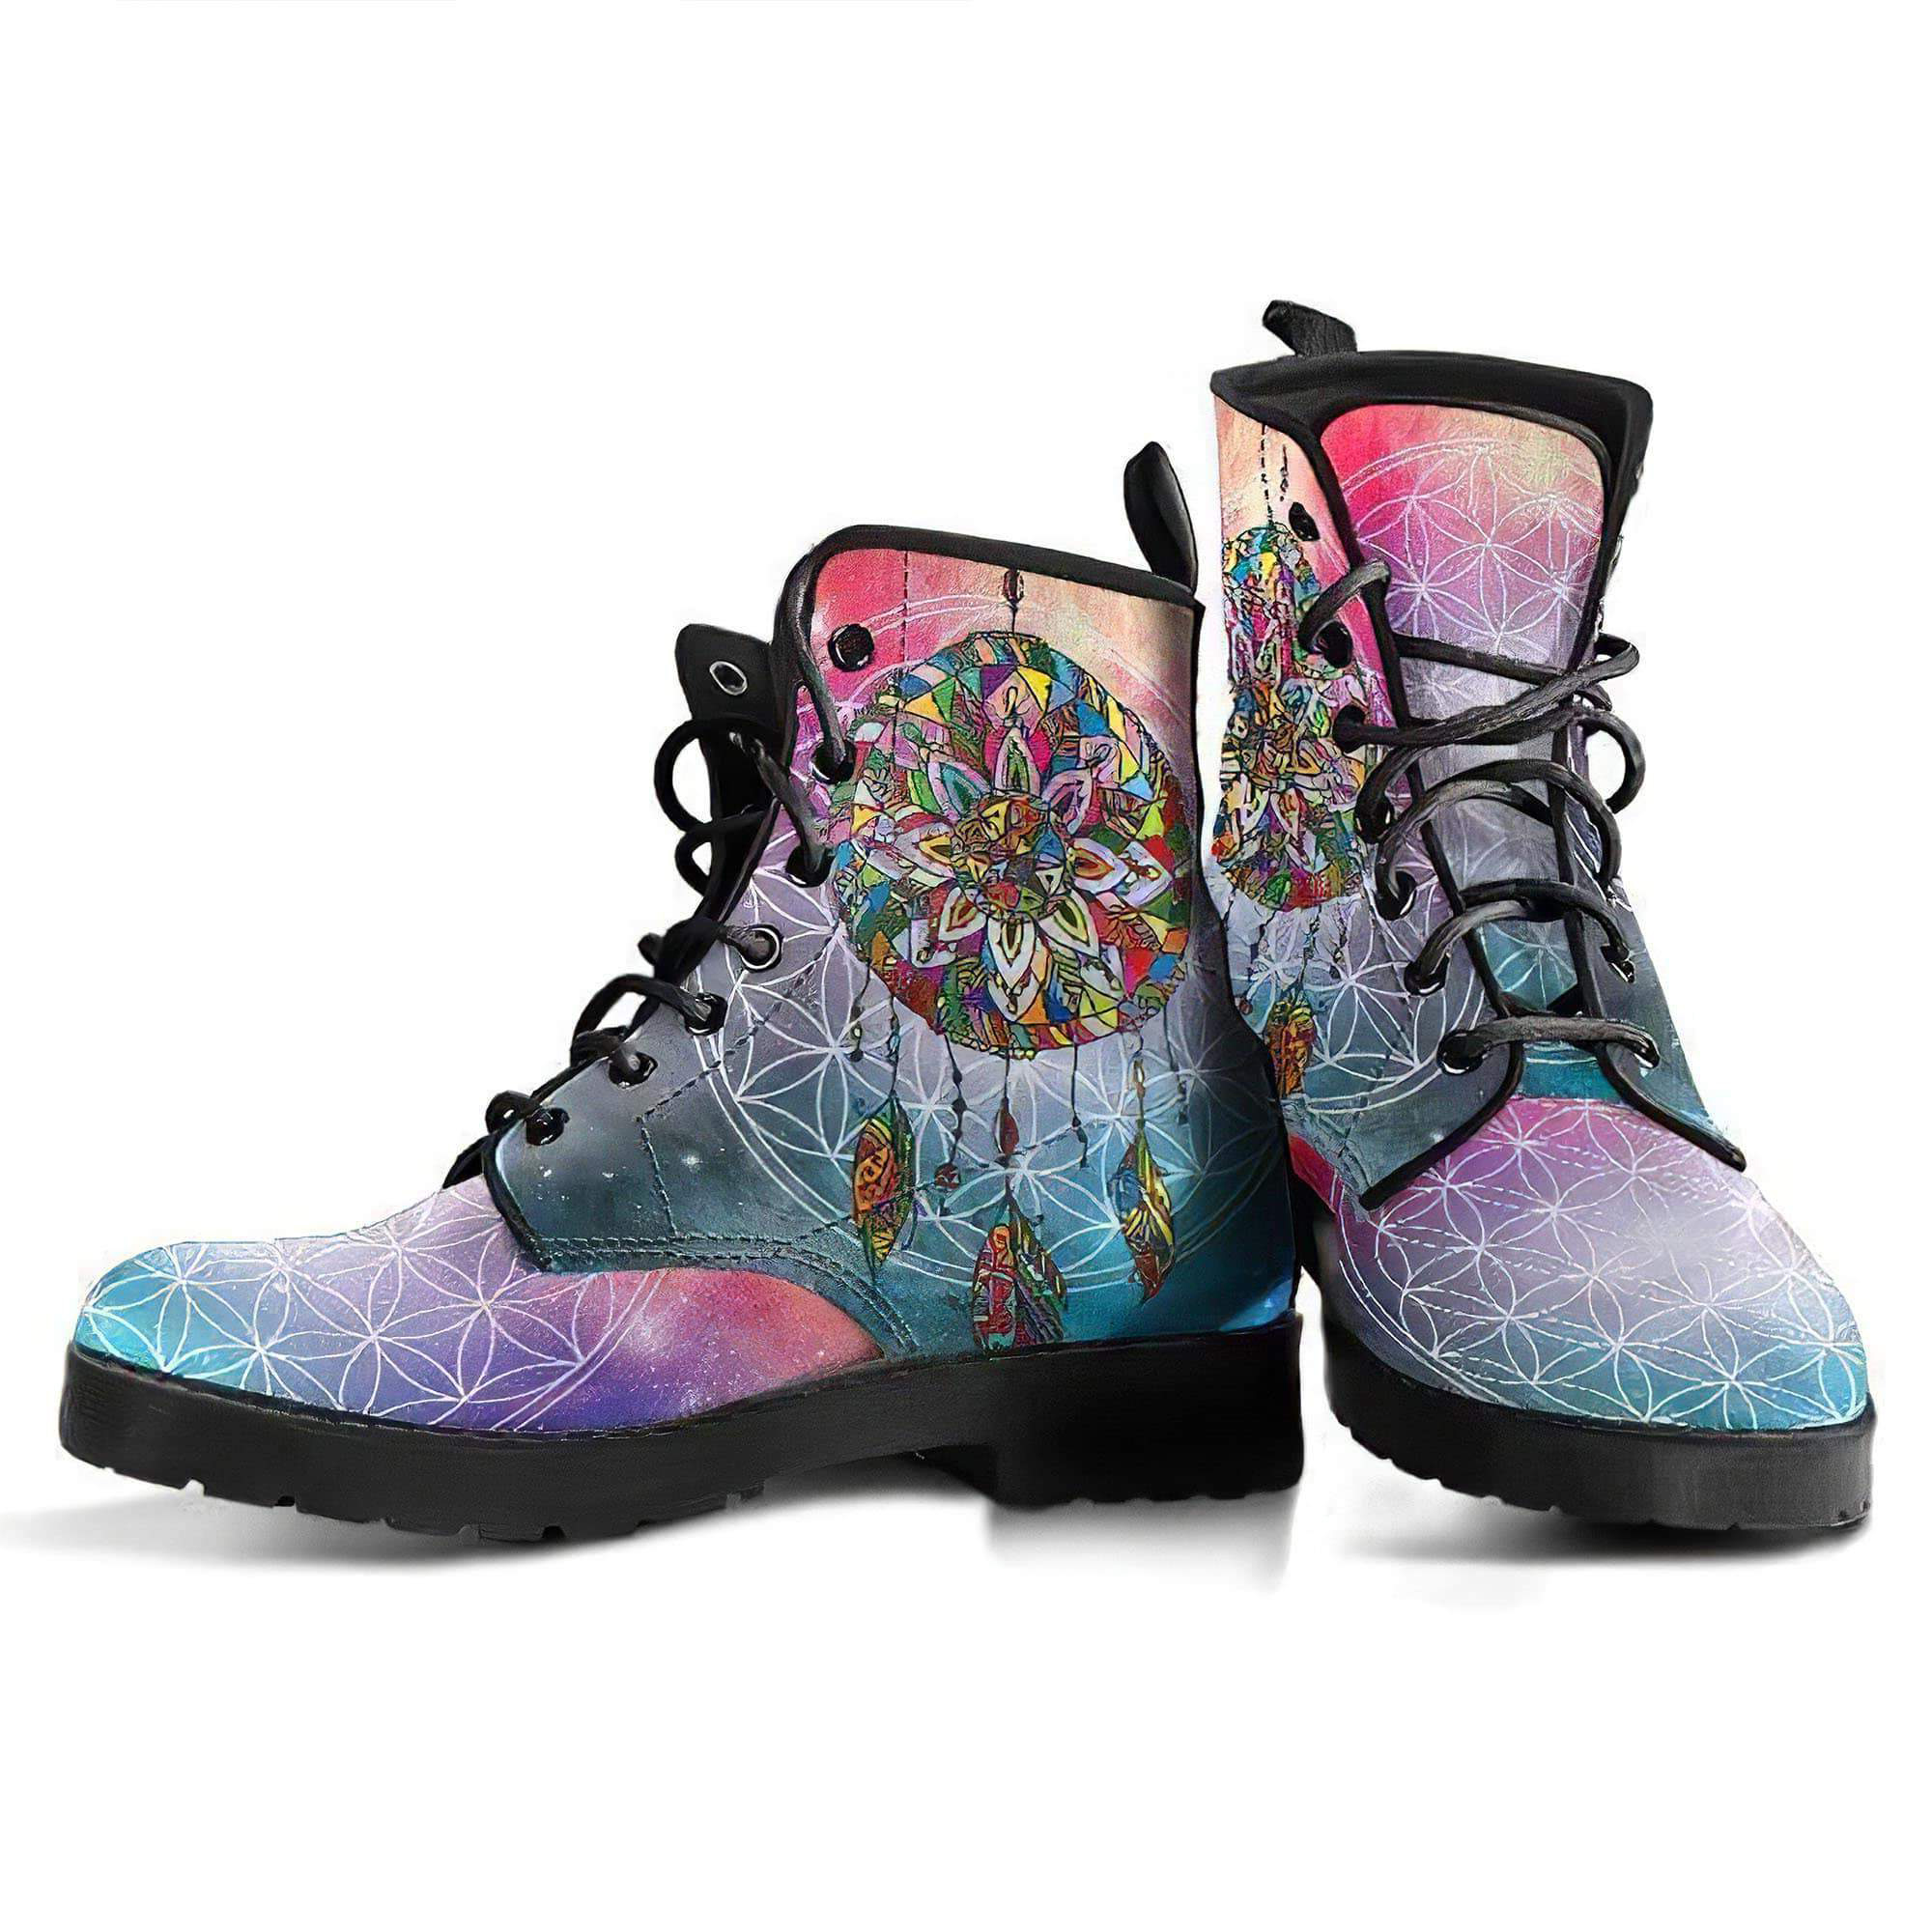 chakra-dreamcatcher-2-handcrafted-boots-women-s-leather-boots-12051818020925.jpg